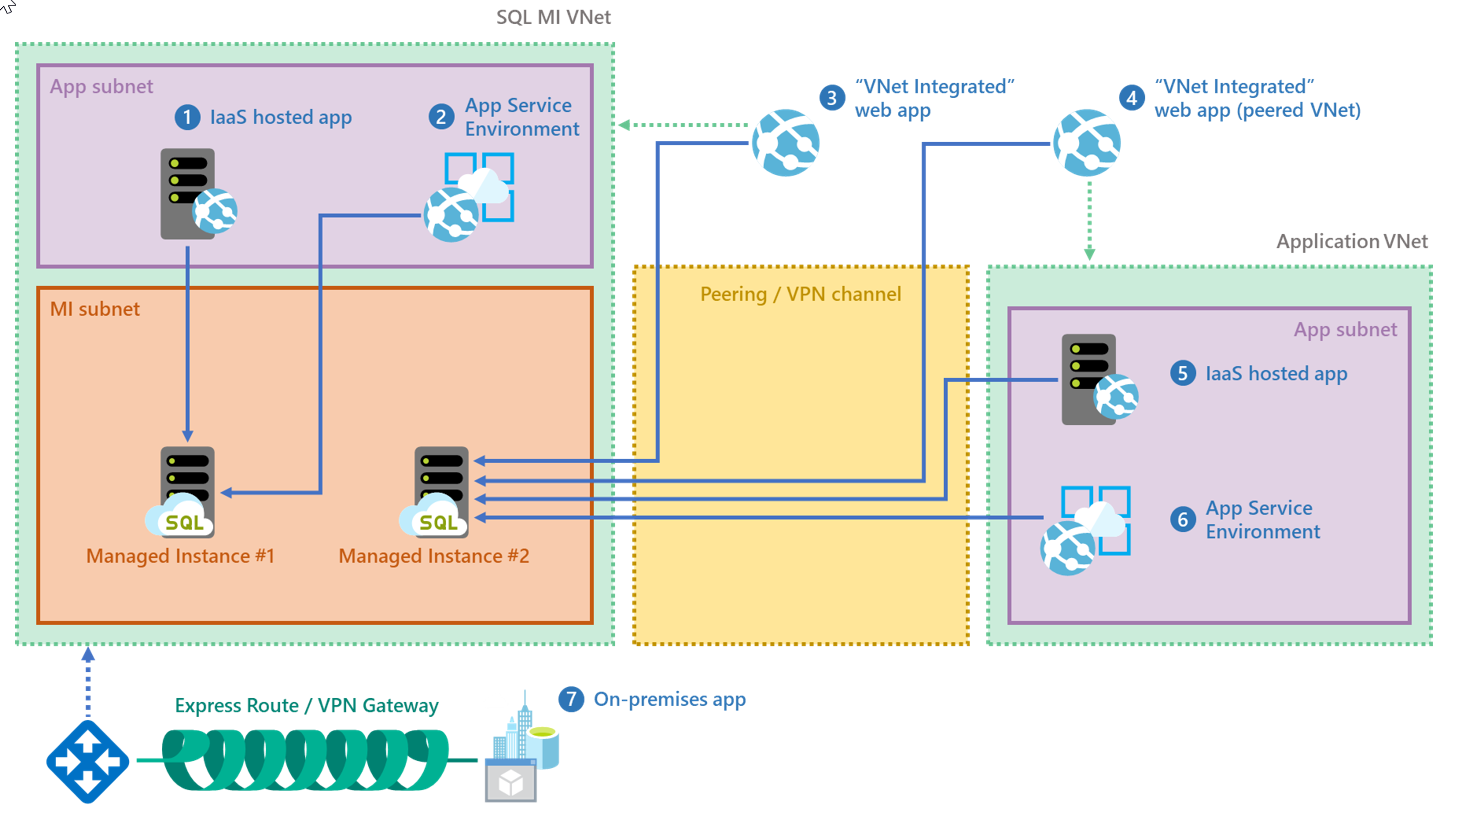 Azure SQL Database Managed Instance is connected to a virtual network [Image Credit: Microsoft]